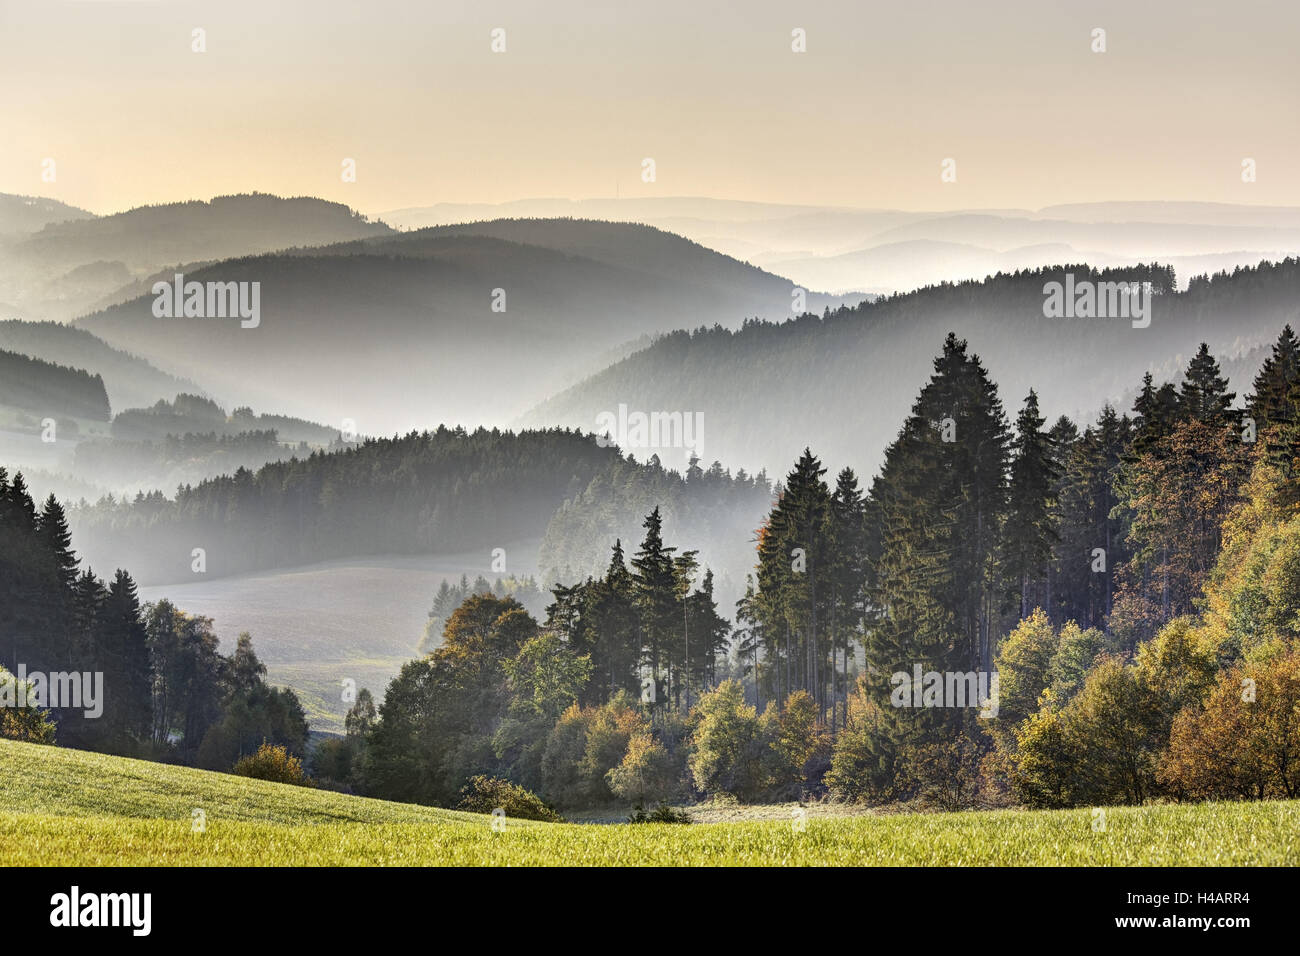 Germany, Thuringia, near Lichtentanne, mountains, valleys, forest, meadow, view from the Thuringian Highlands to the Franconian Forest, Stock Photo